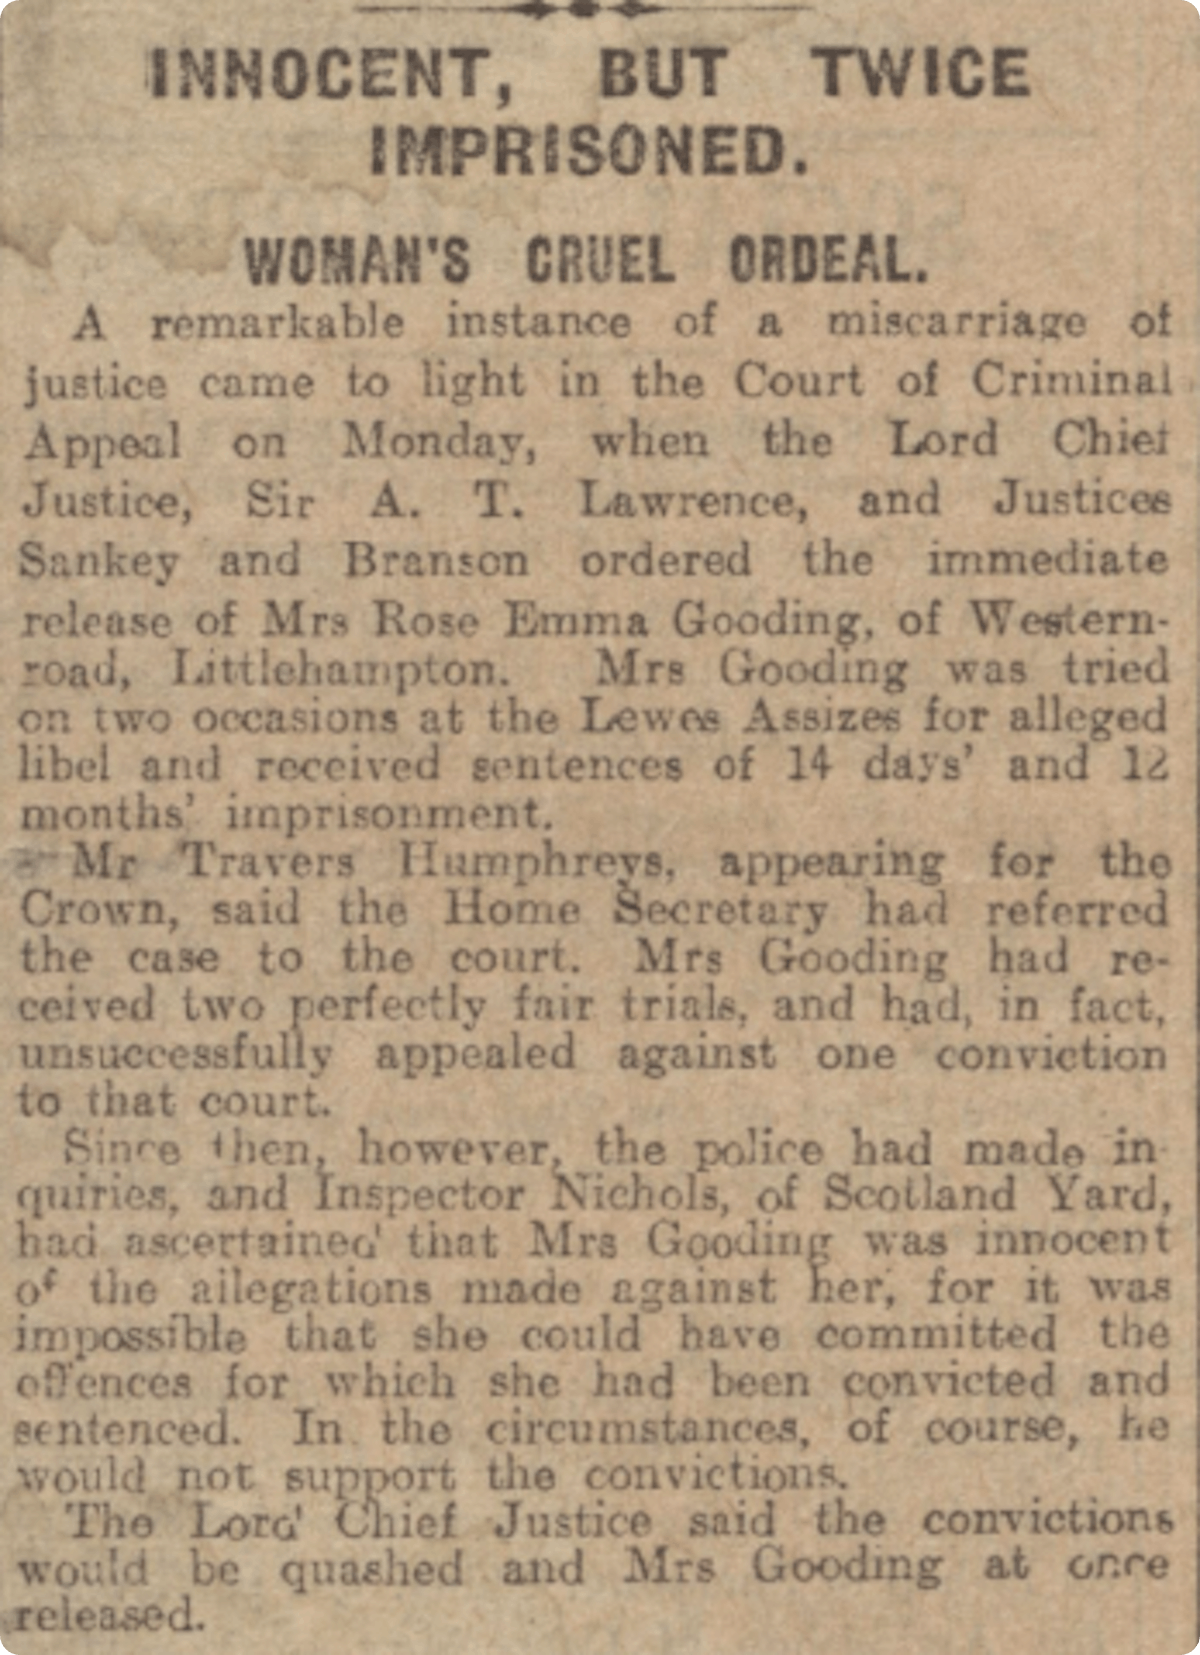 Rose’s conviction found to be a ’miscarriage of justice’ in the Hull Daily Mail, 26 July 1921.